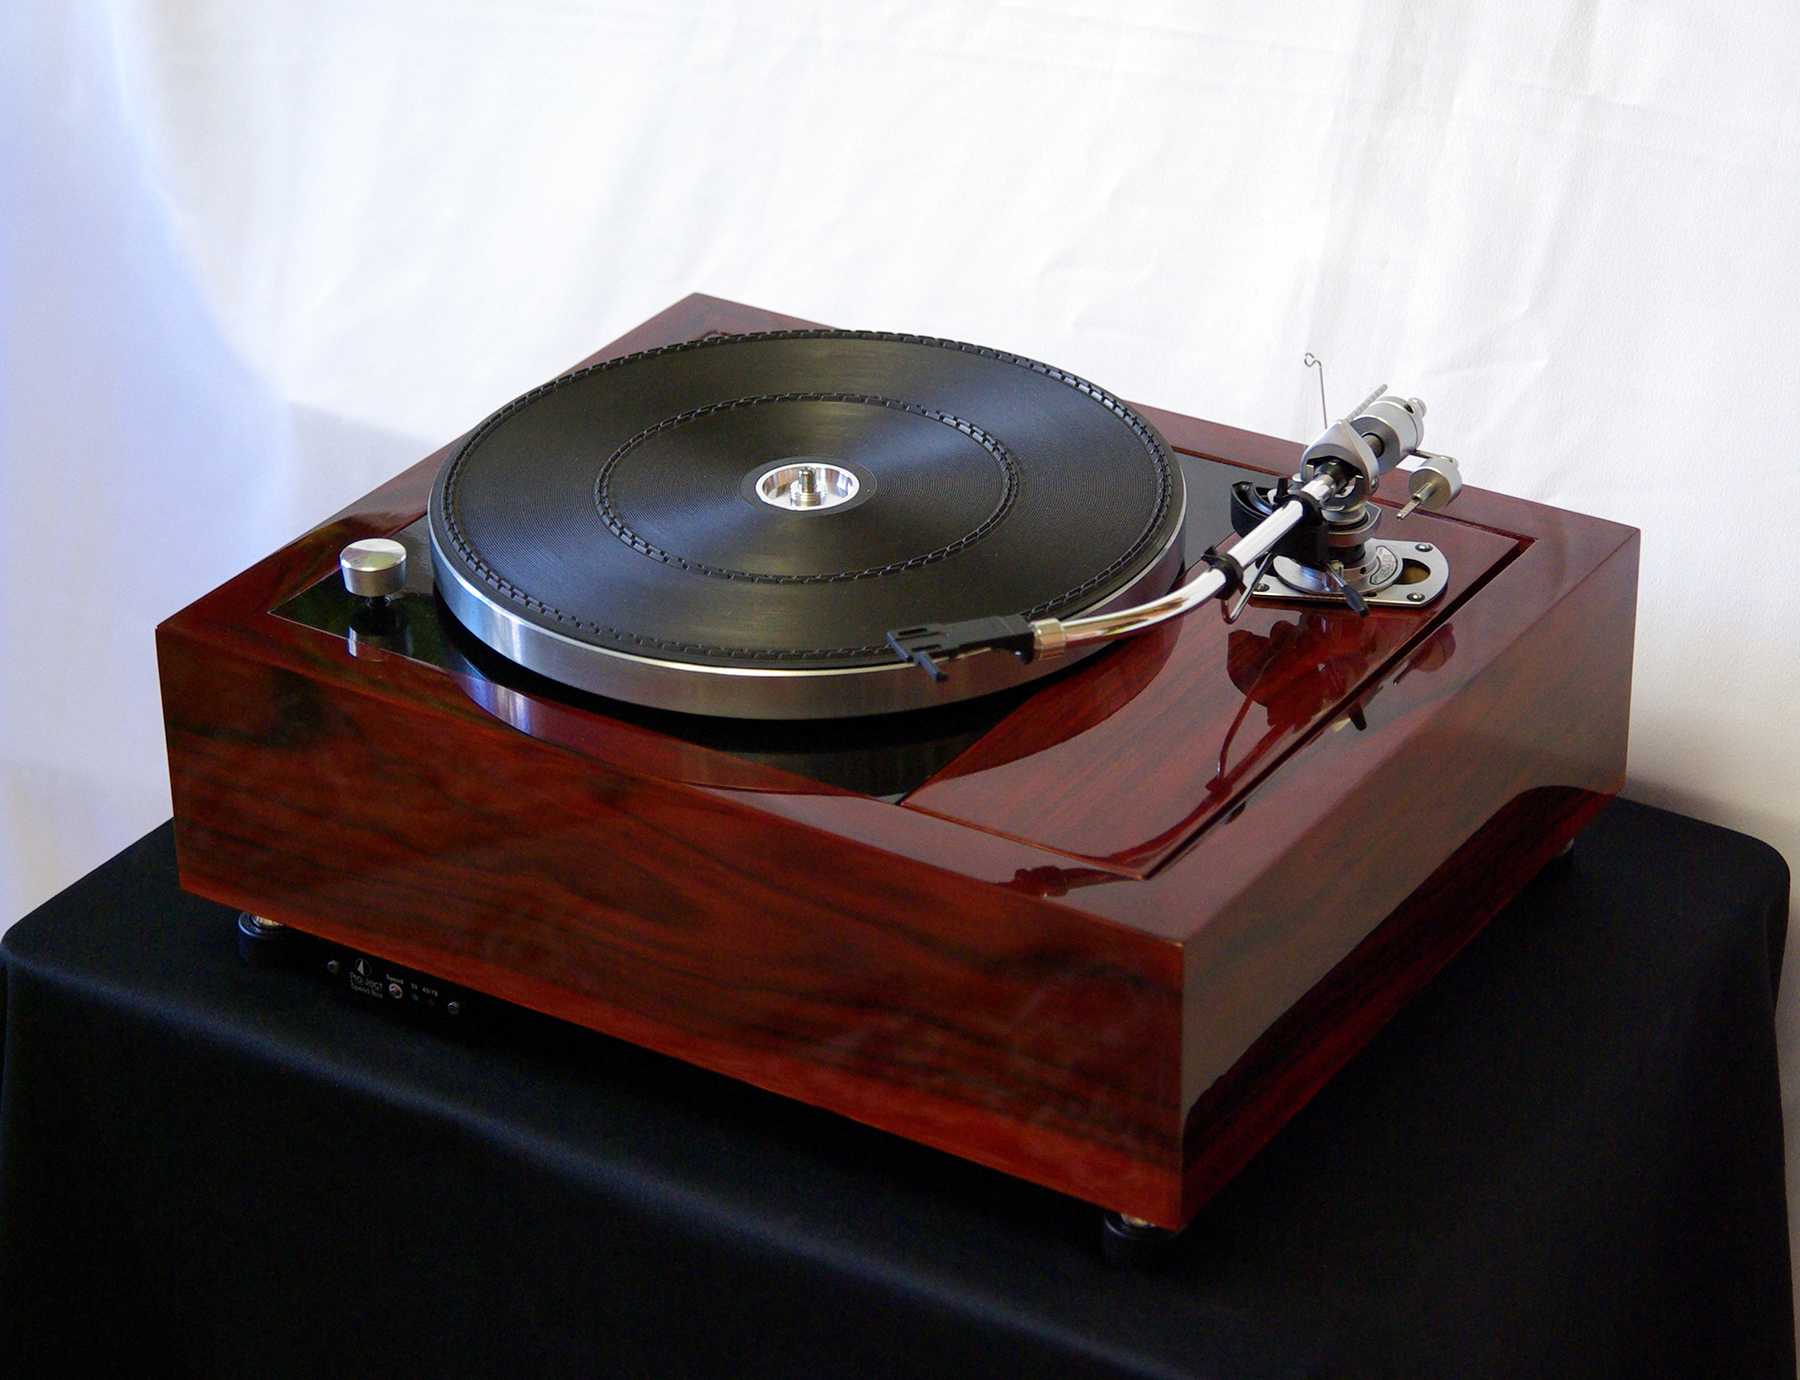 Thorens td1601 turntable | hfa - the independent source for audio equipment reviews